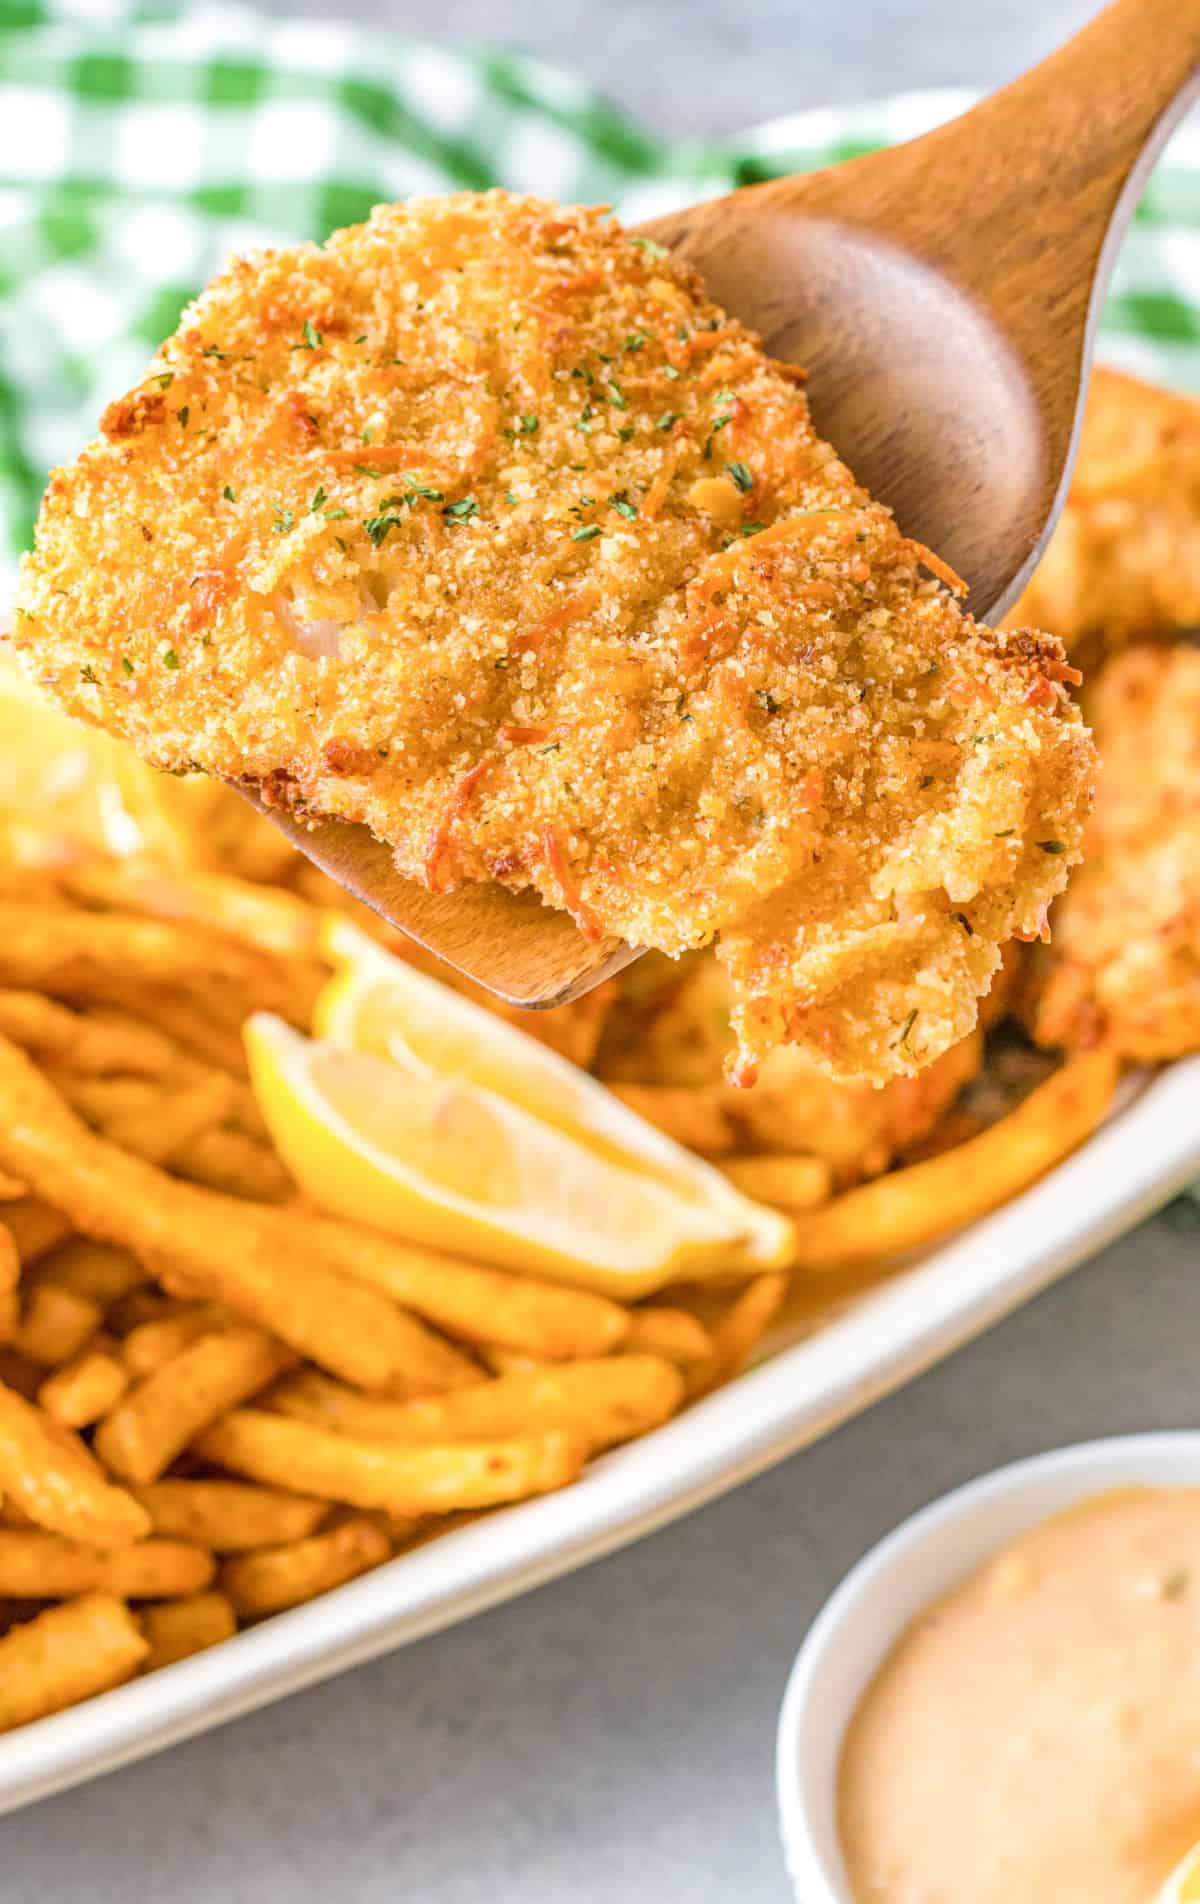 A close up photo of a wooden spatula picking up a breaded fish filet.